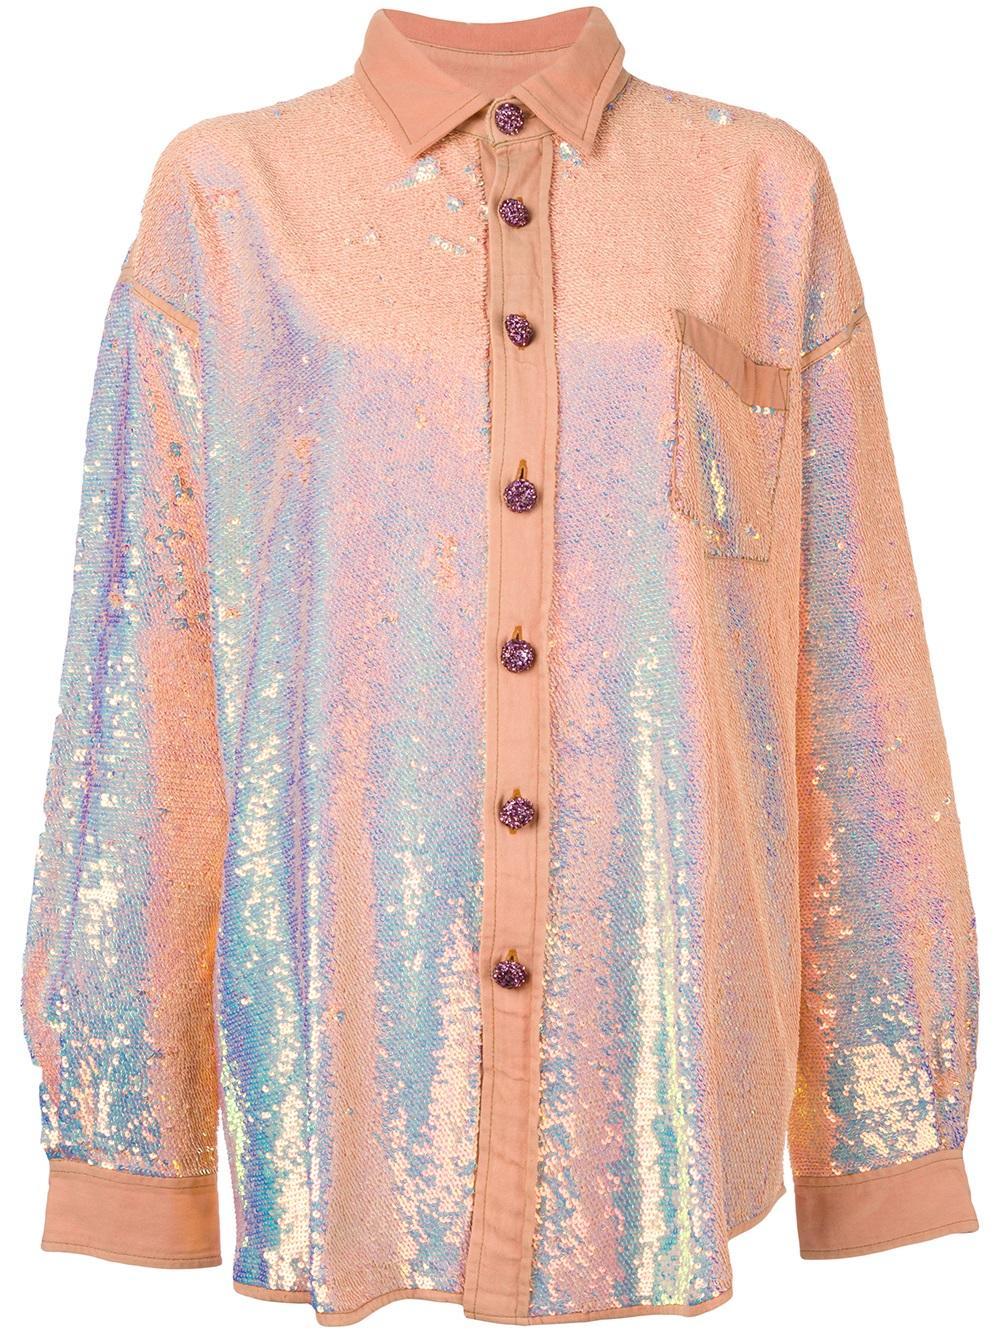 Ashish Cotton Sequin Oversized Shirt in Pink - Lyst